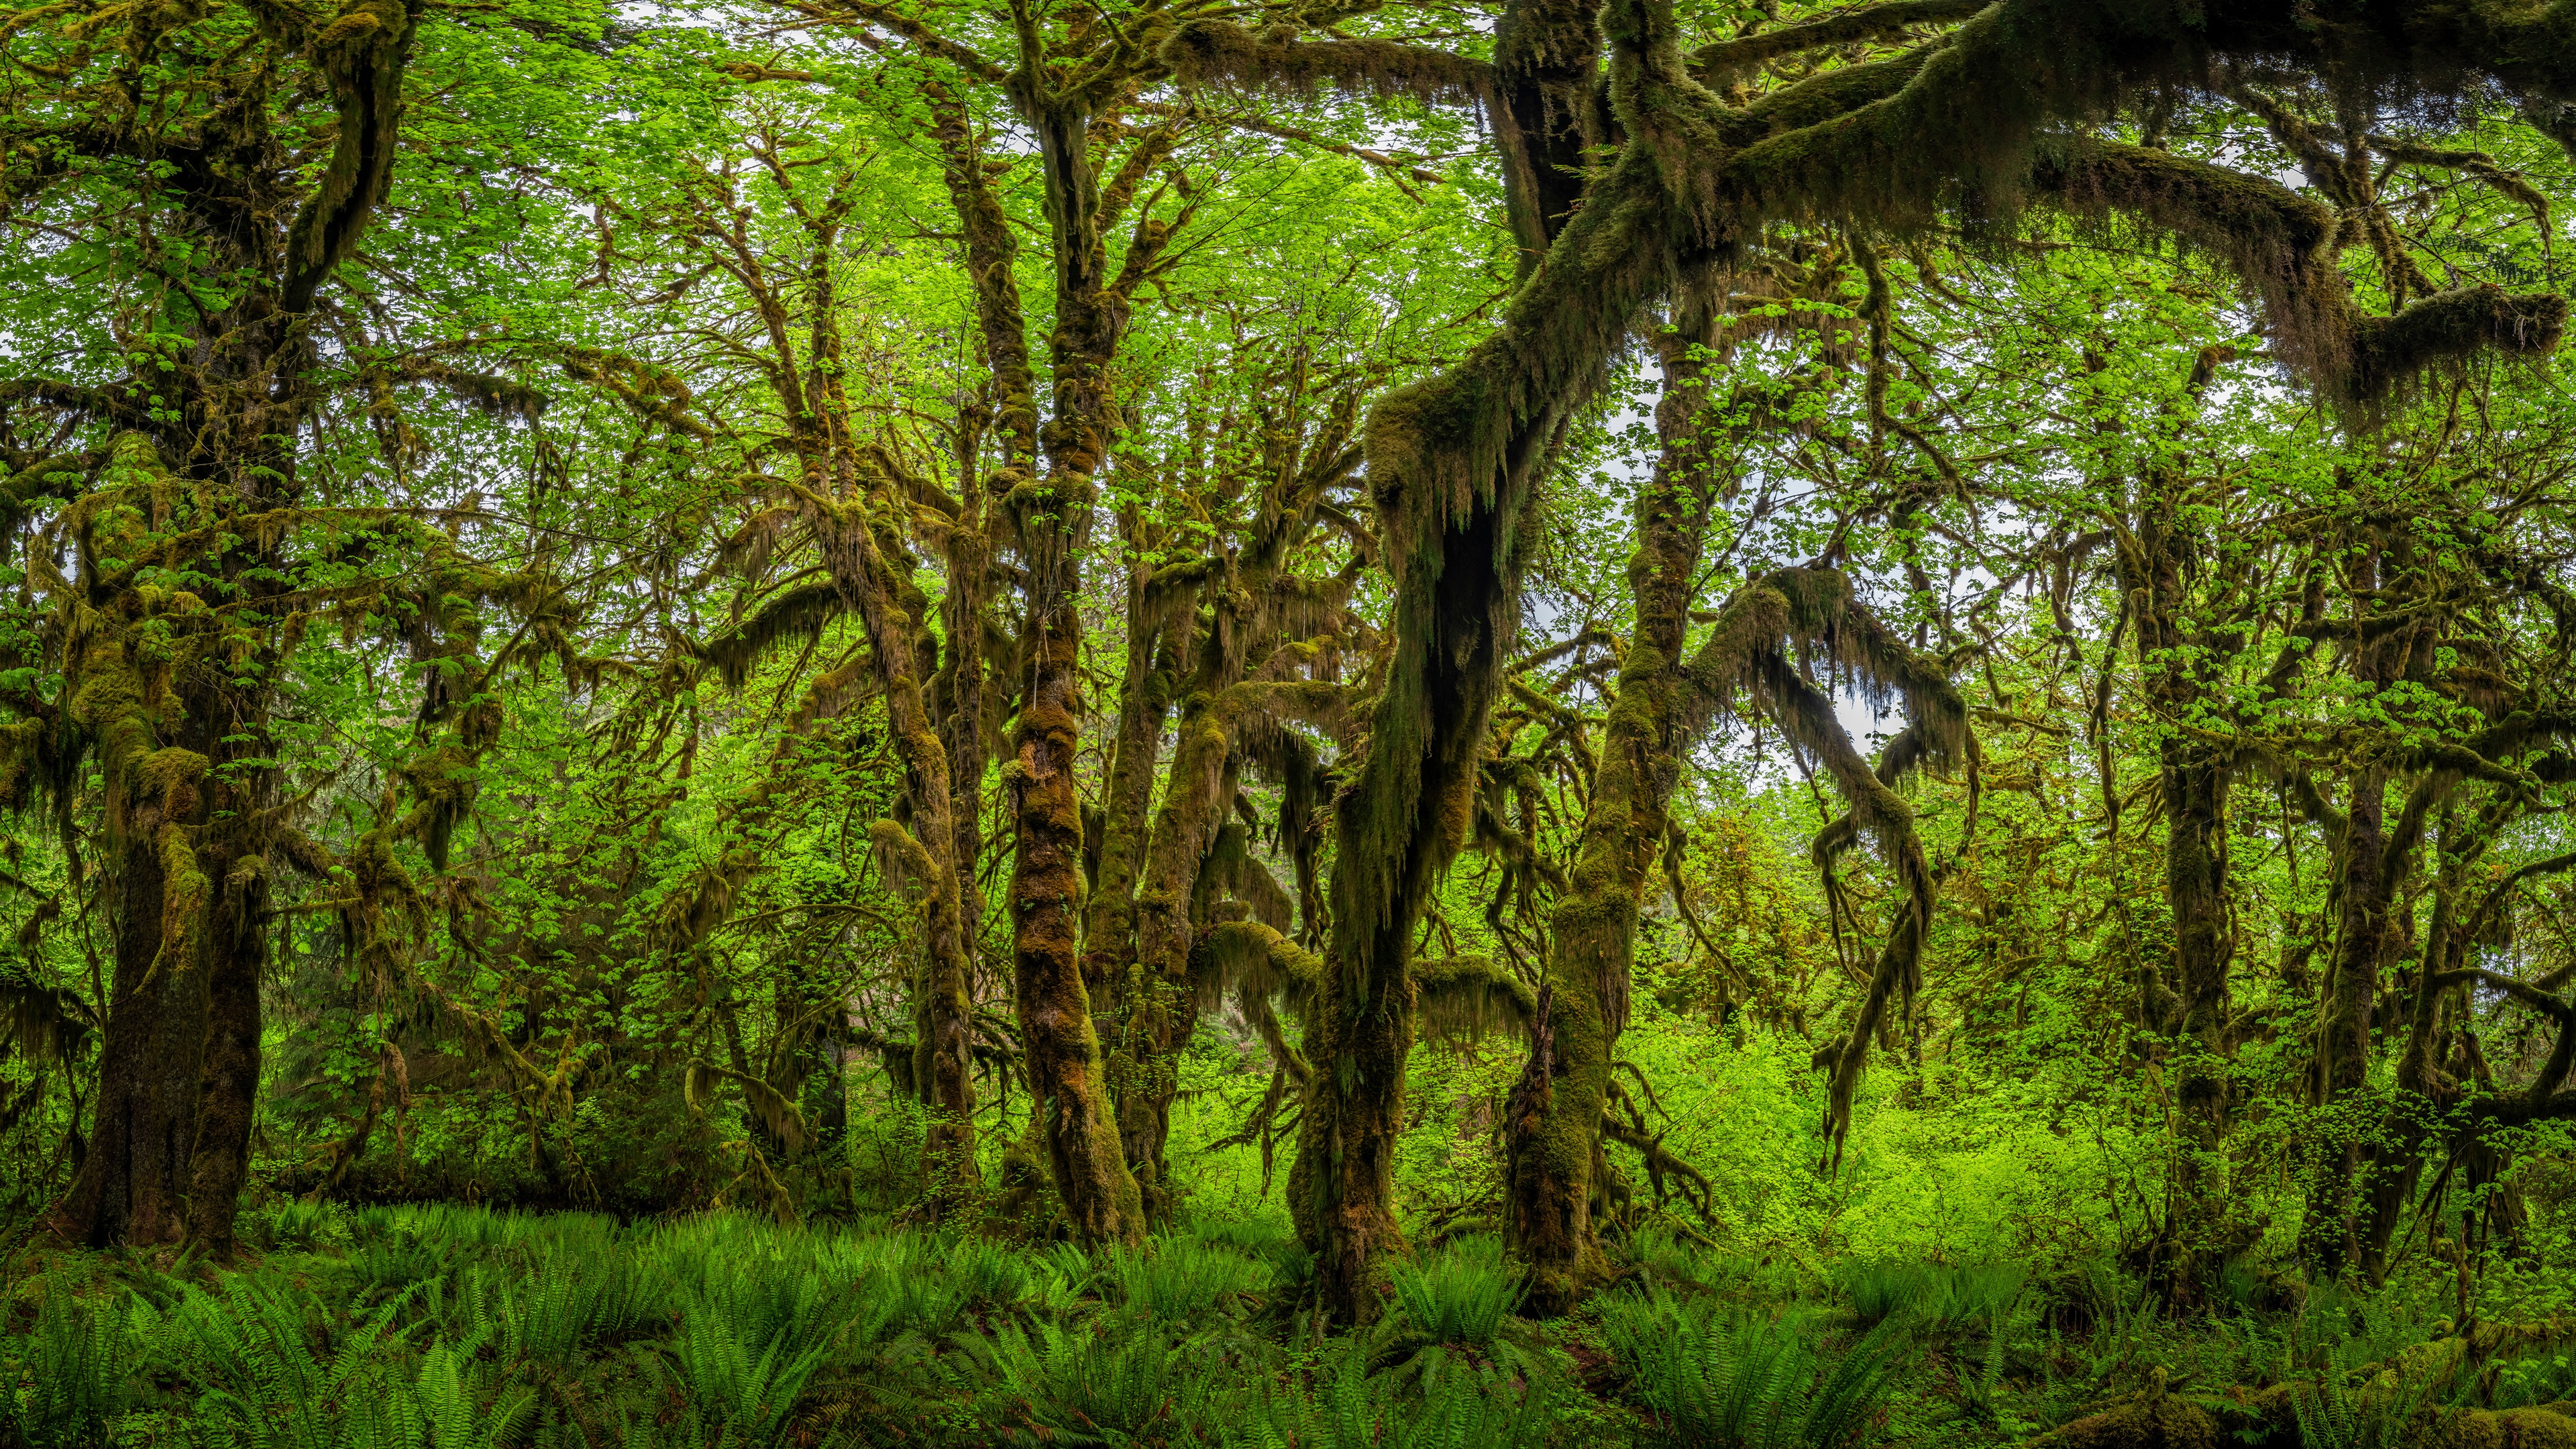 General 3840x2160 nature forest trees USA Olympic National Park Washington (state) moss plants spring green